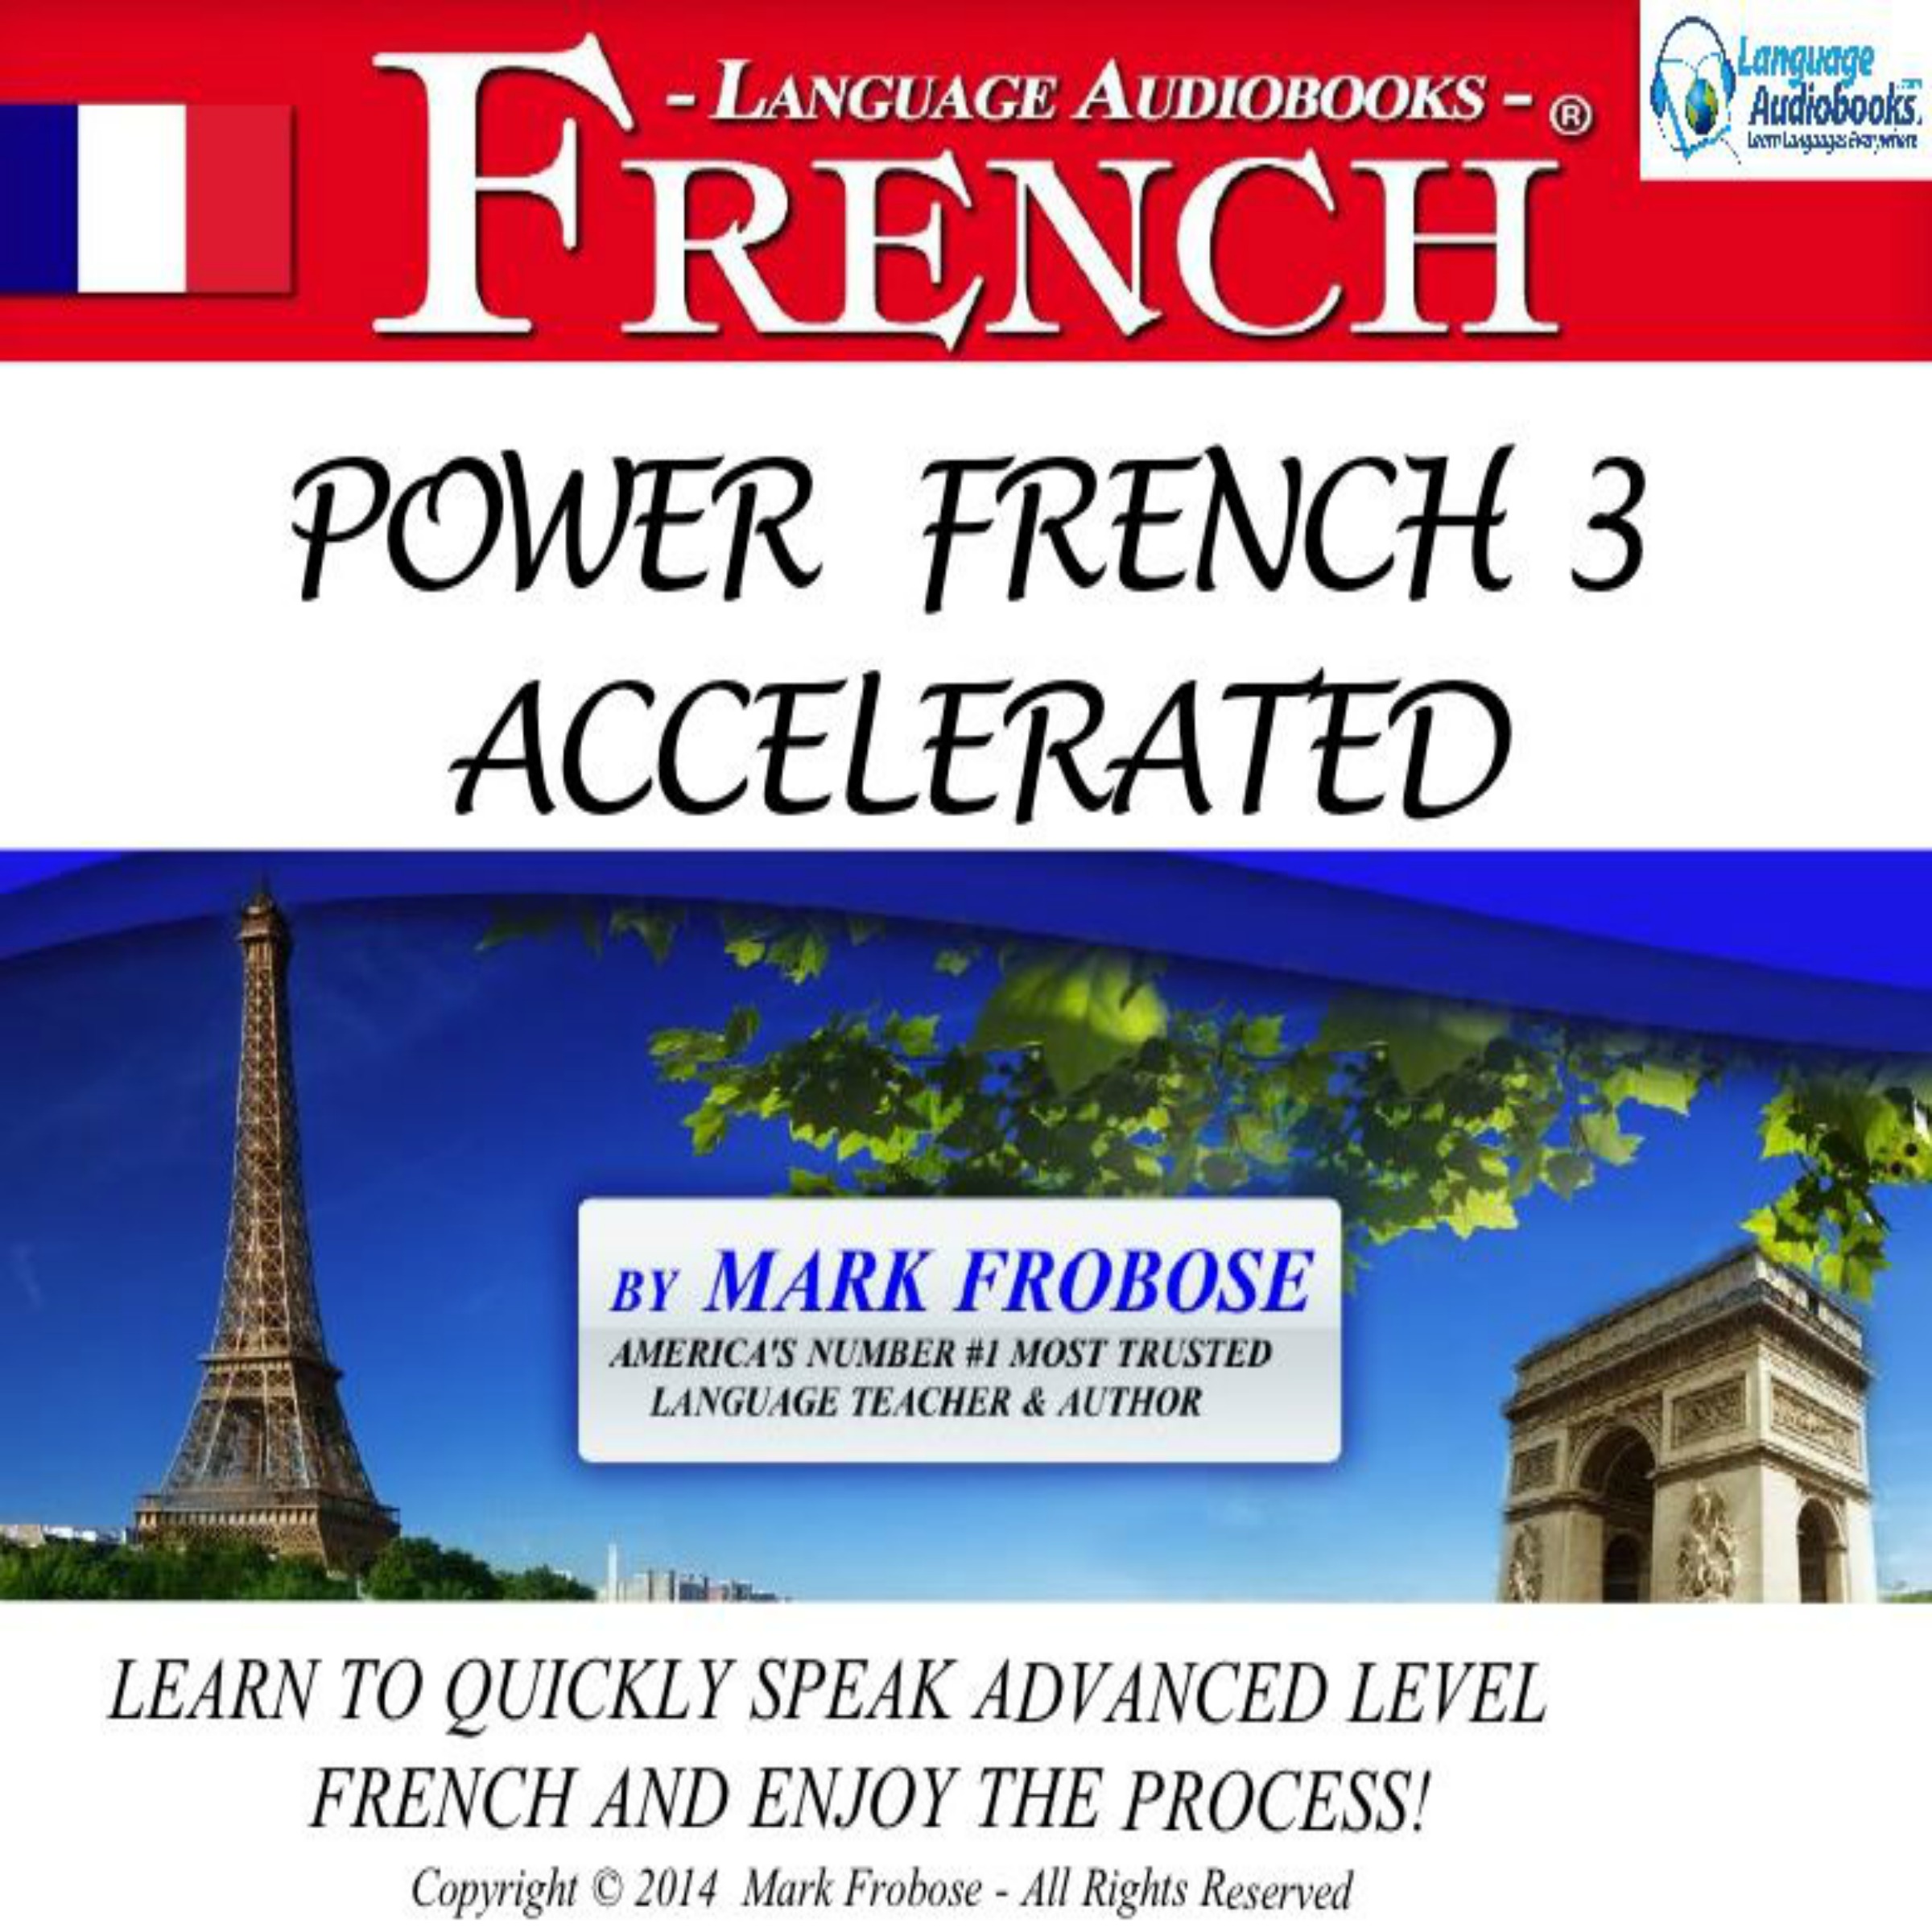 POWER FRENCH 3 ACCELERATED